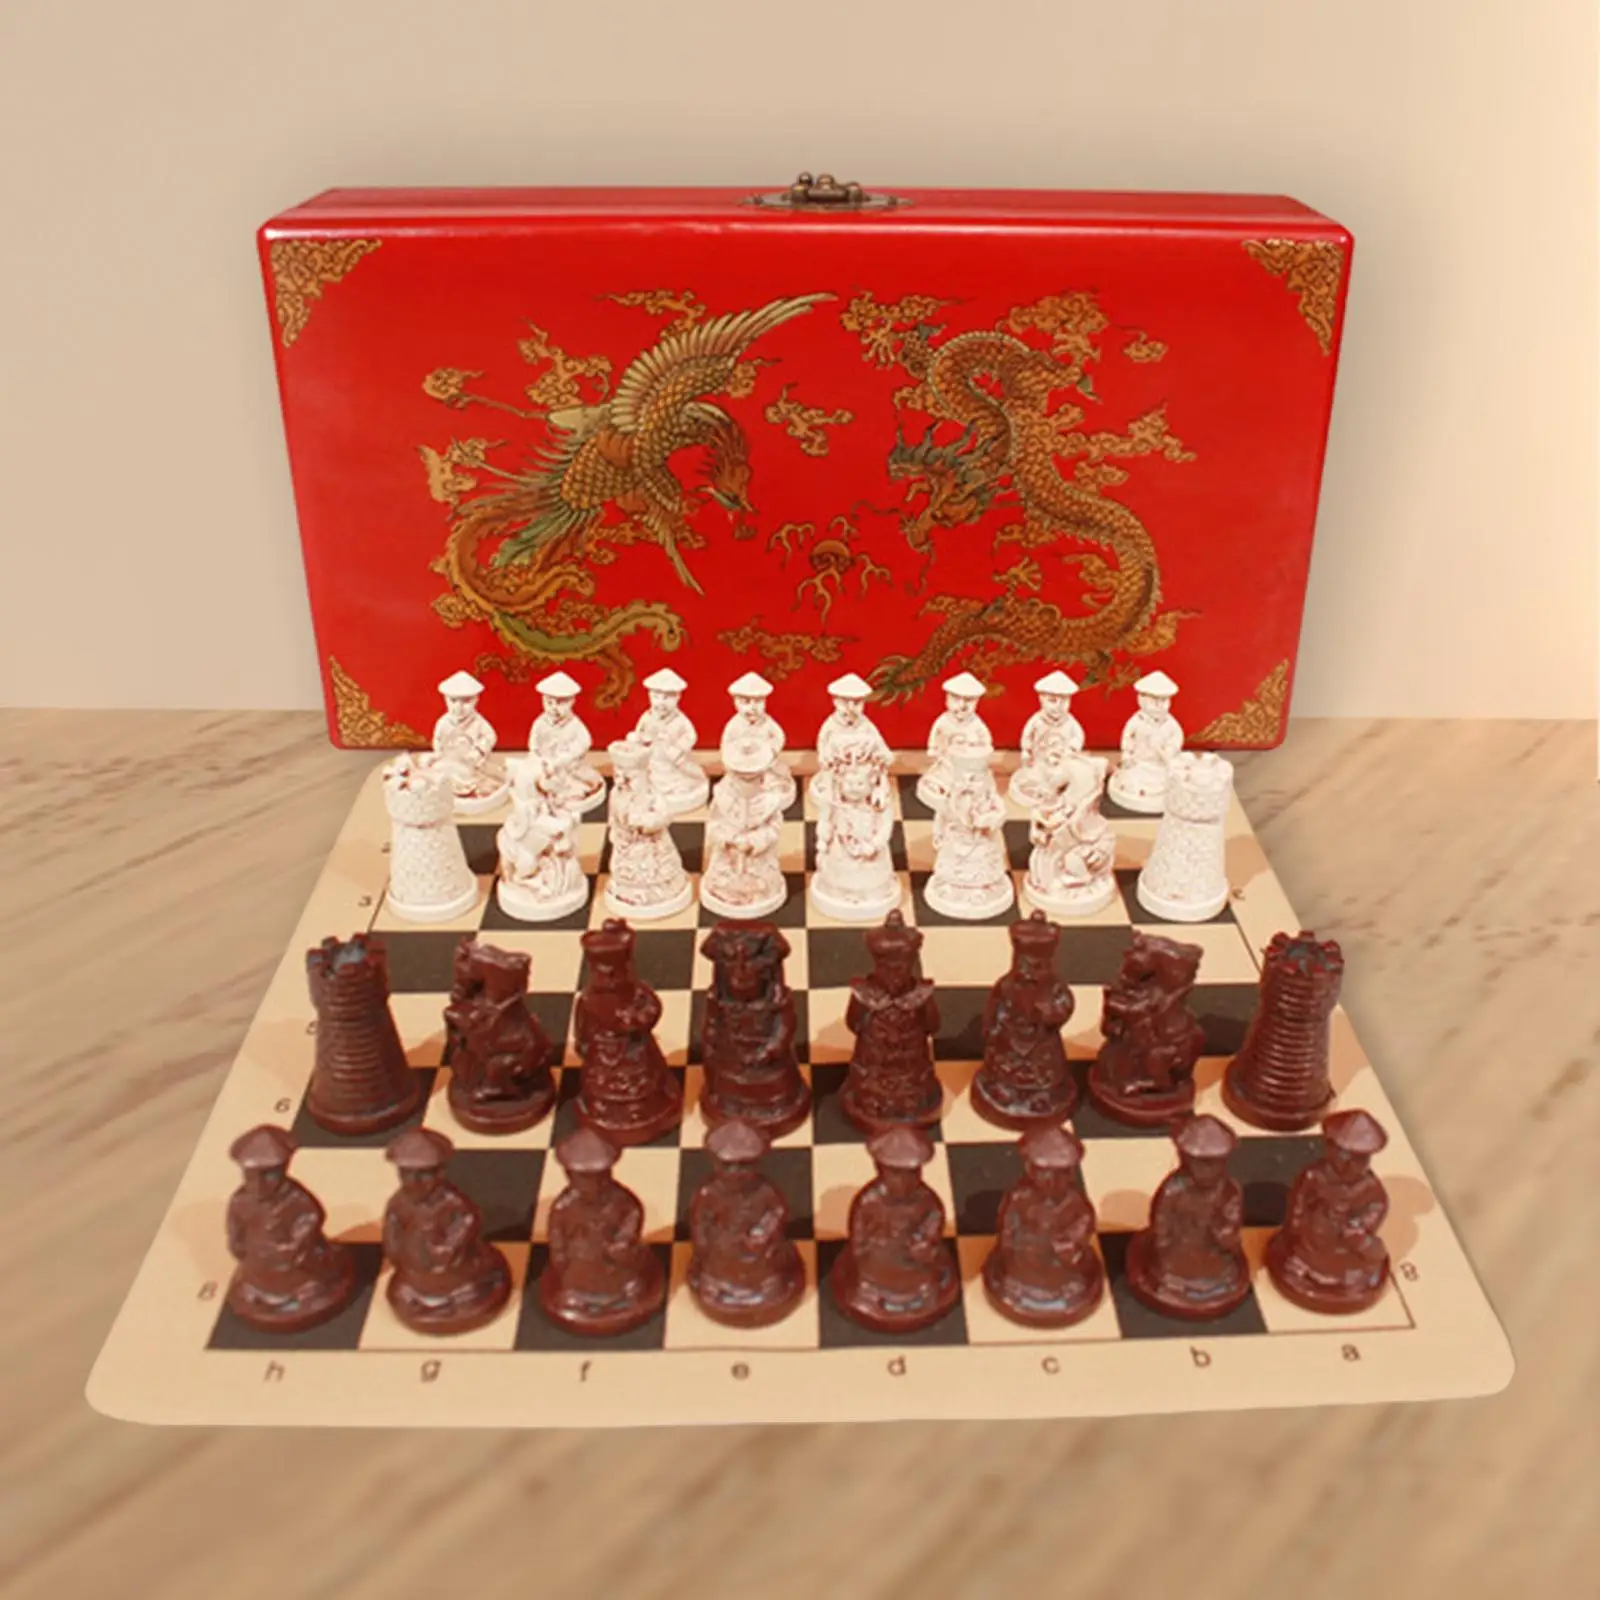 Handmade Chess Set Deluxe Wooden Chess Board Chess Pieces for Adults Indoor Game Entertainment Travel Enjoy Leisure Time